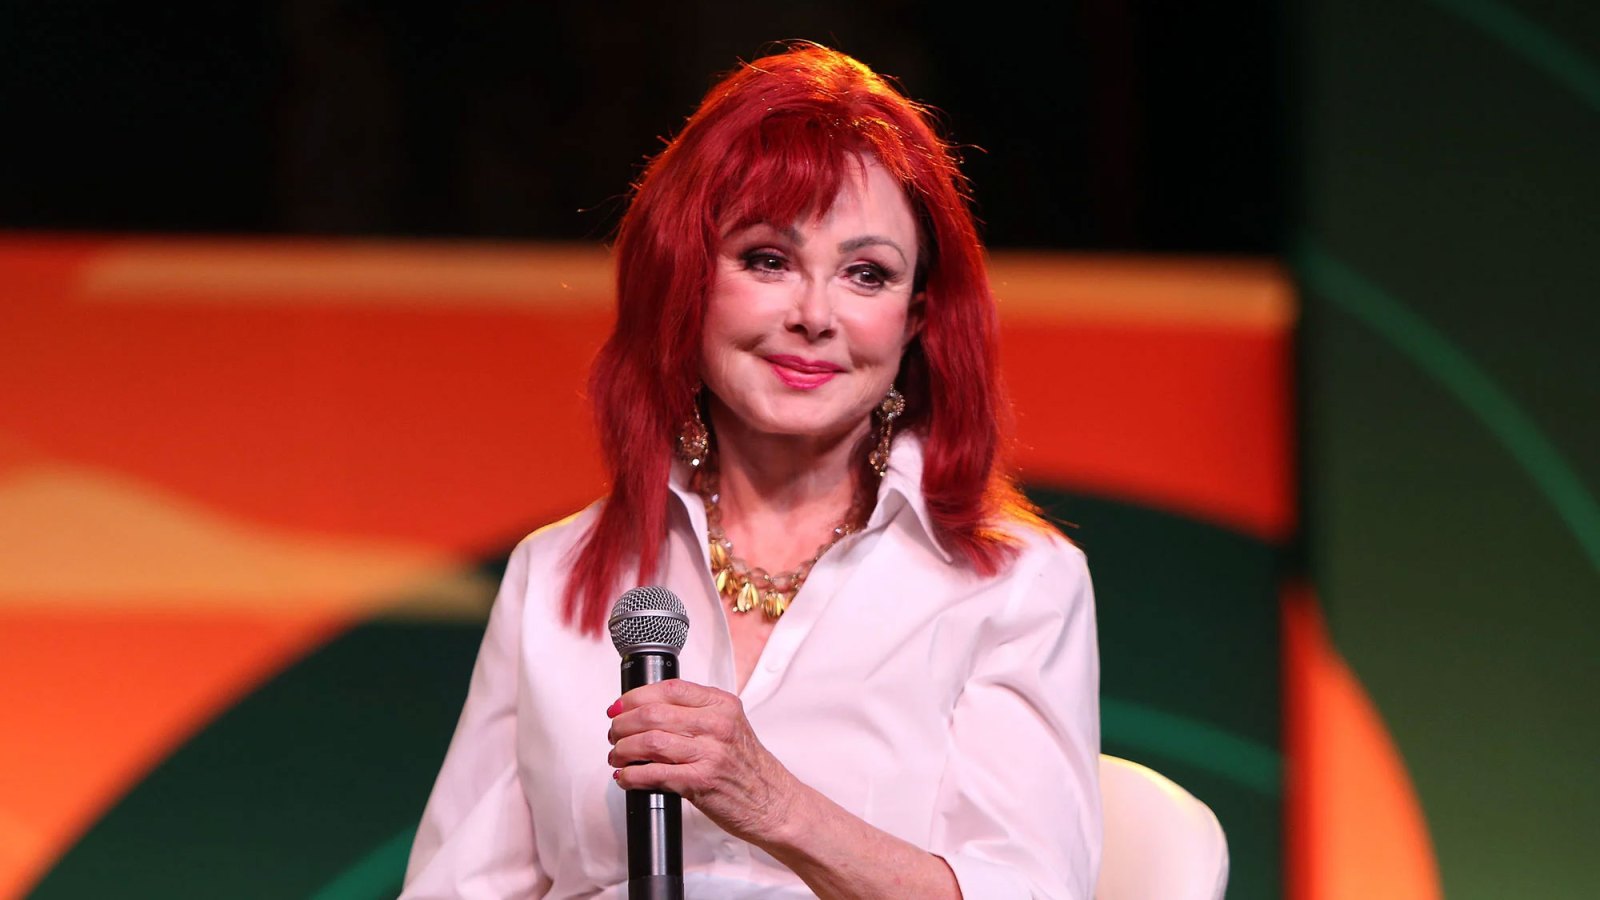 Naomi Judd’s Autopsy Report Reveals More Tragic Details About Her Death